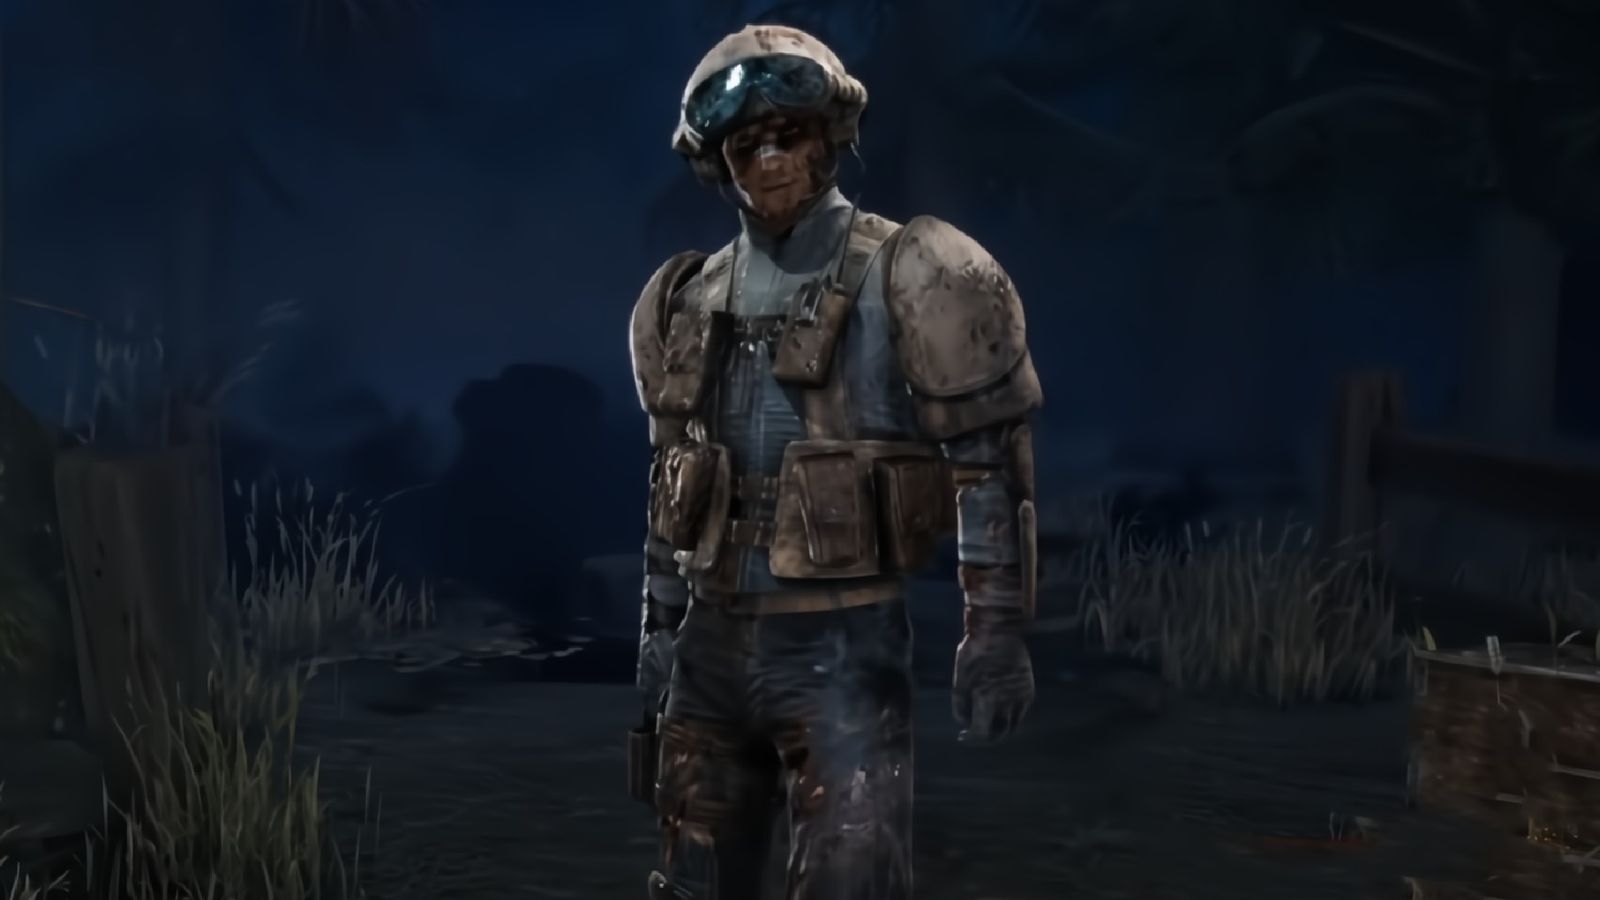 Dead By Daylight - skin of operator Blitz from Rainbow Six Siege, stood in a dark forest.